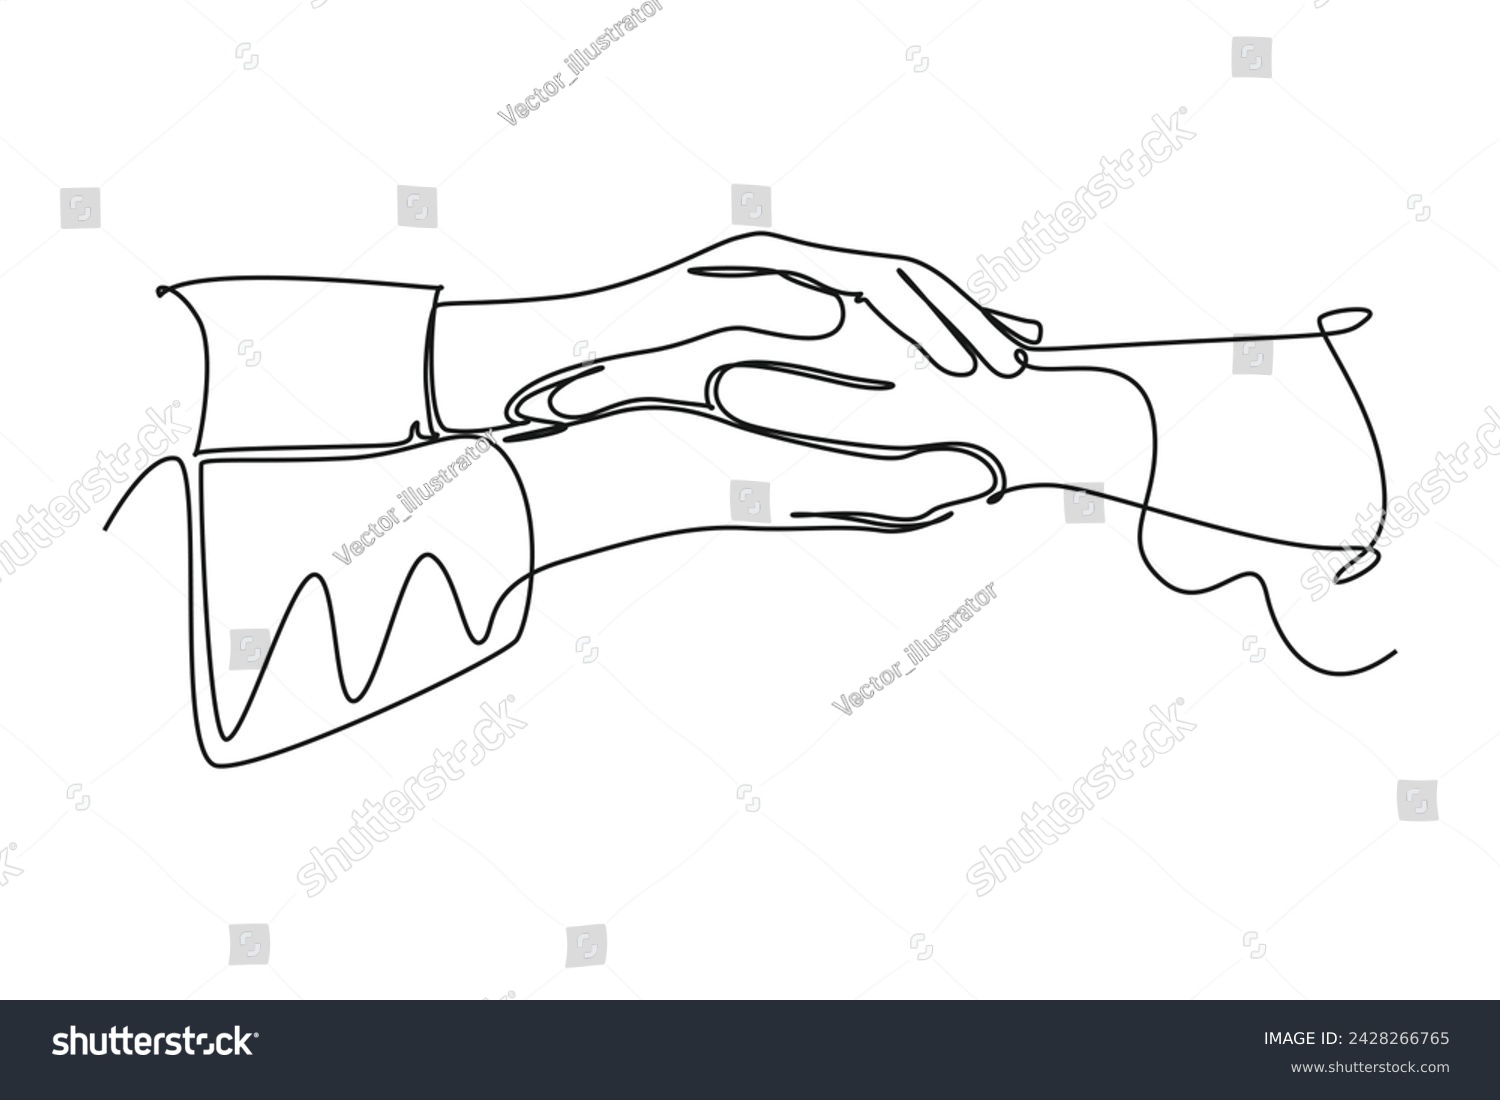 SVG of Single one line drawing The doctor holds a patient's hand to reassure the medical examination process. physical therapy rehabilitation concept. Continuous line draw design vector svg